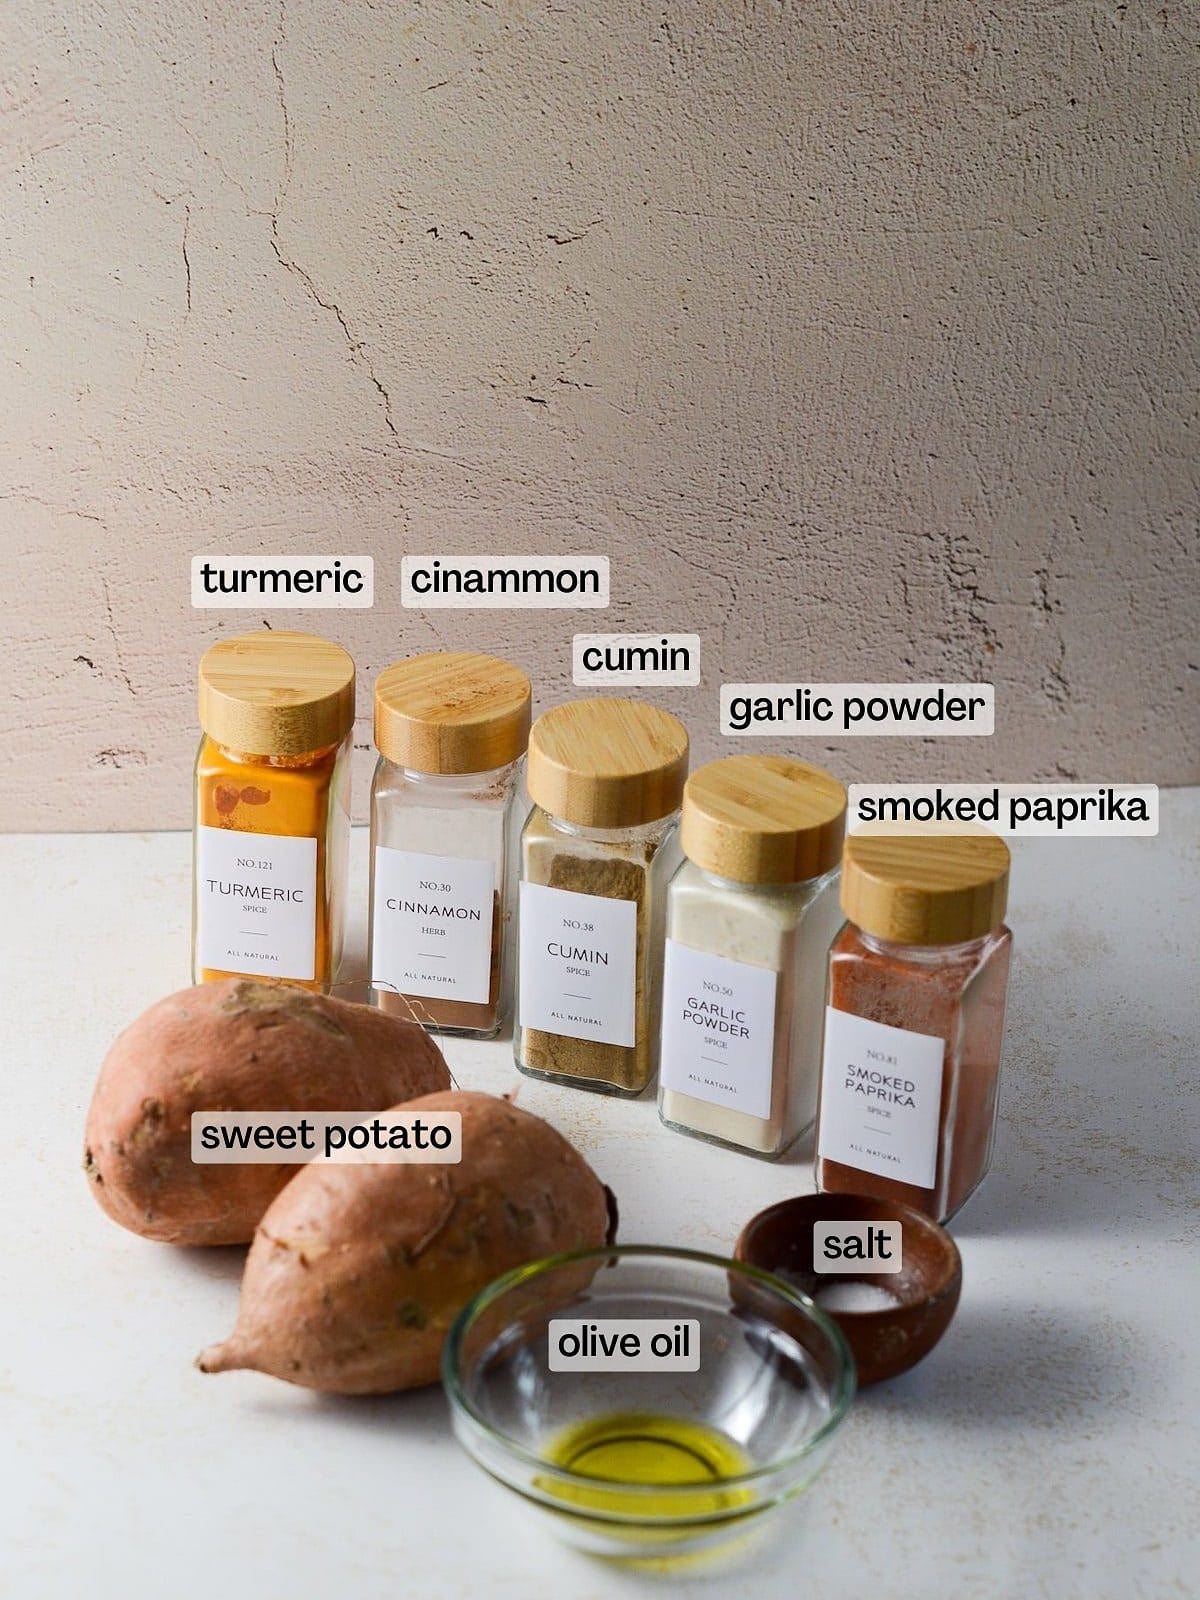 This is a photo of ingredients specifically for the sweet potatoes.